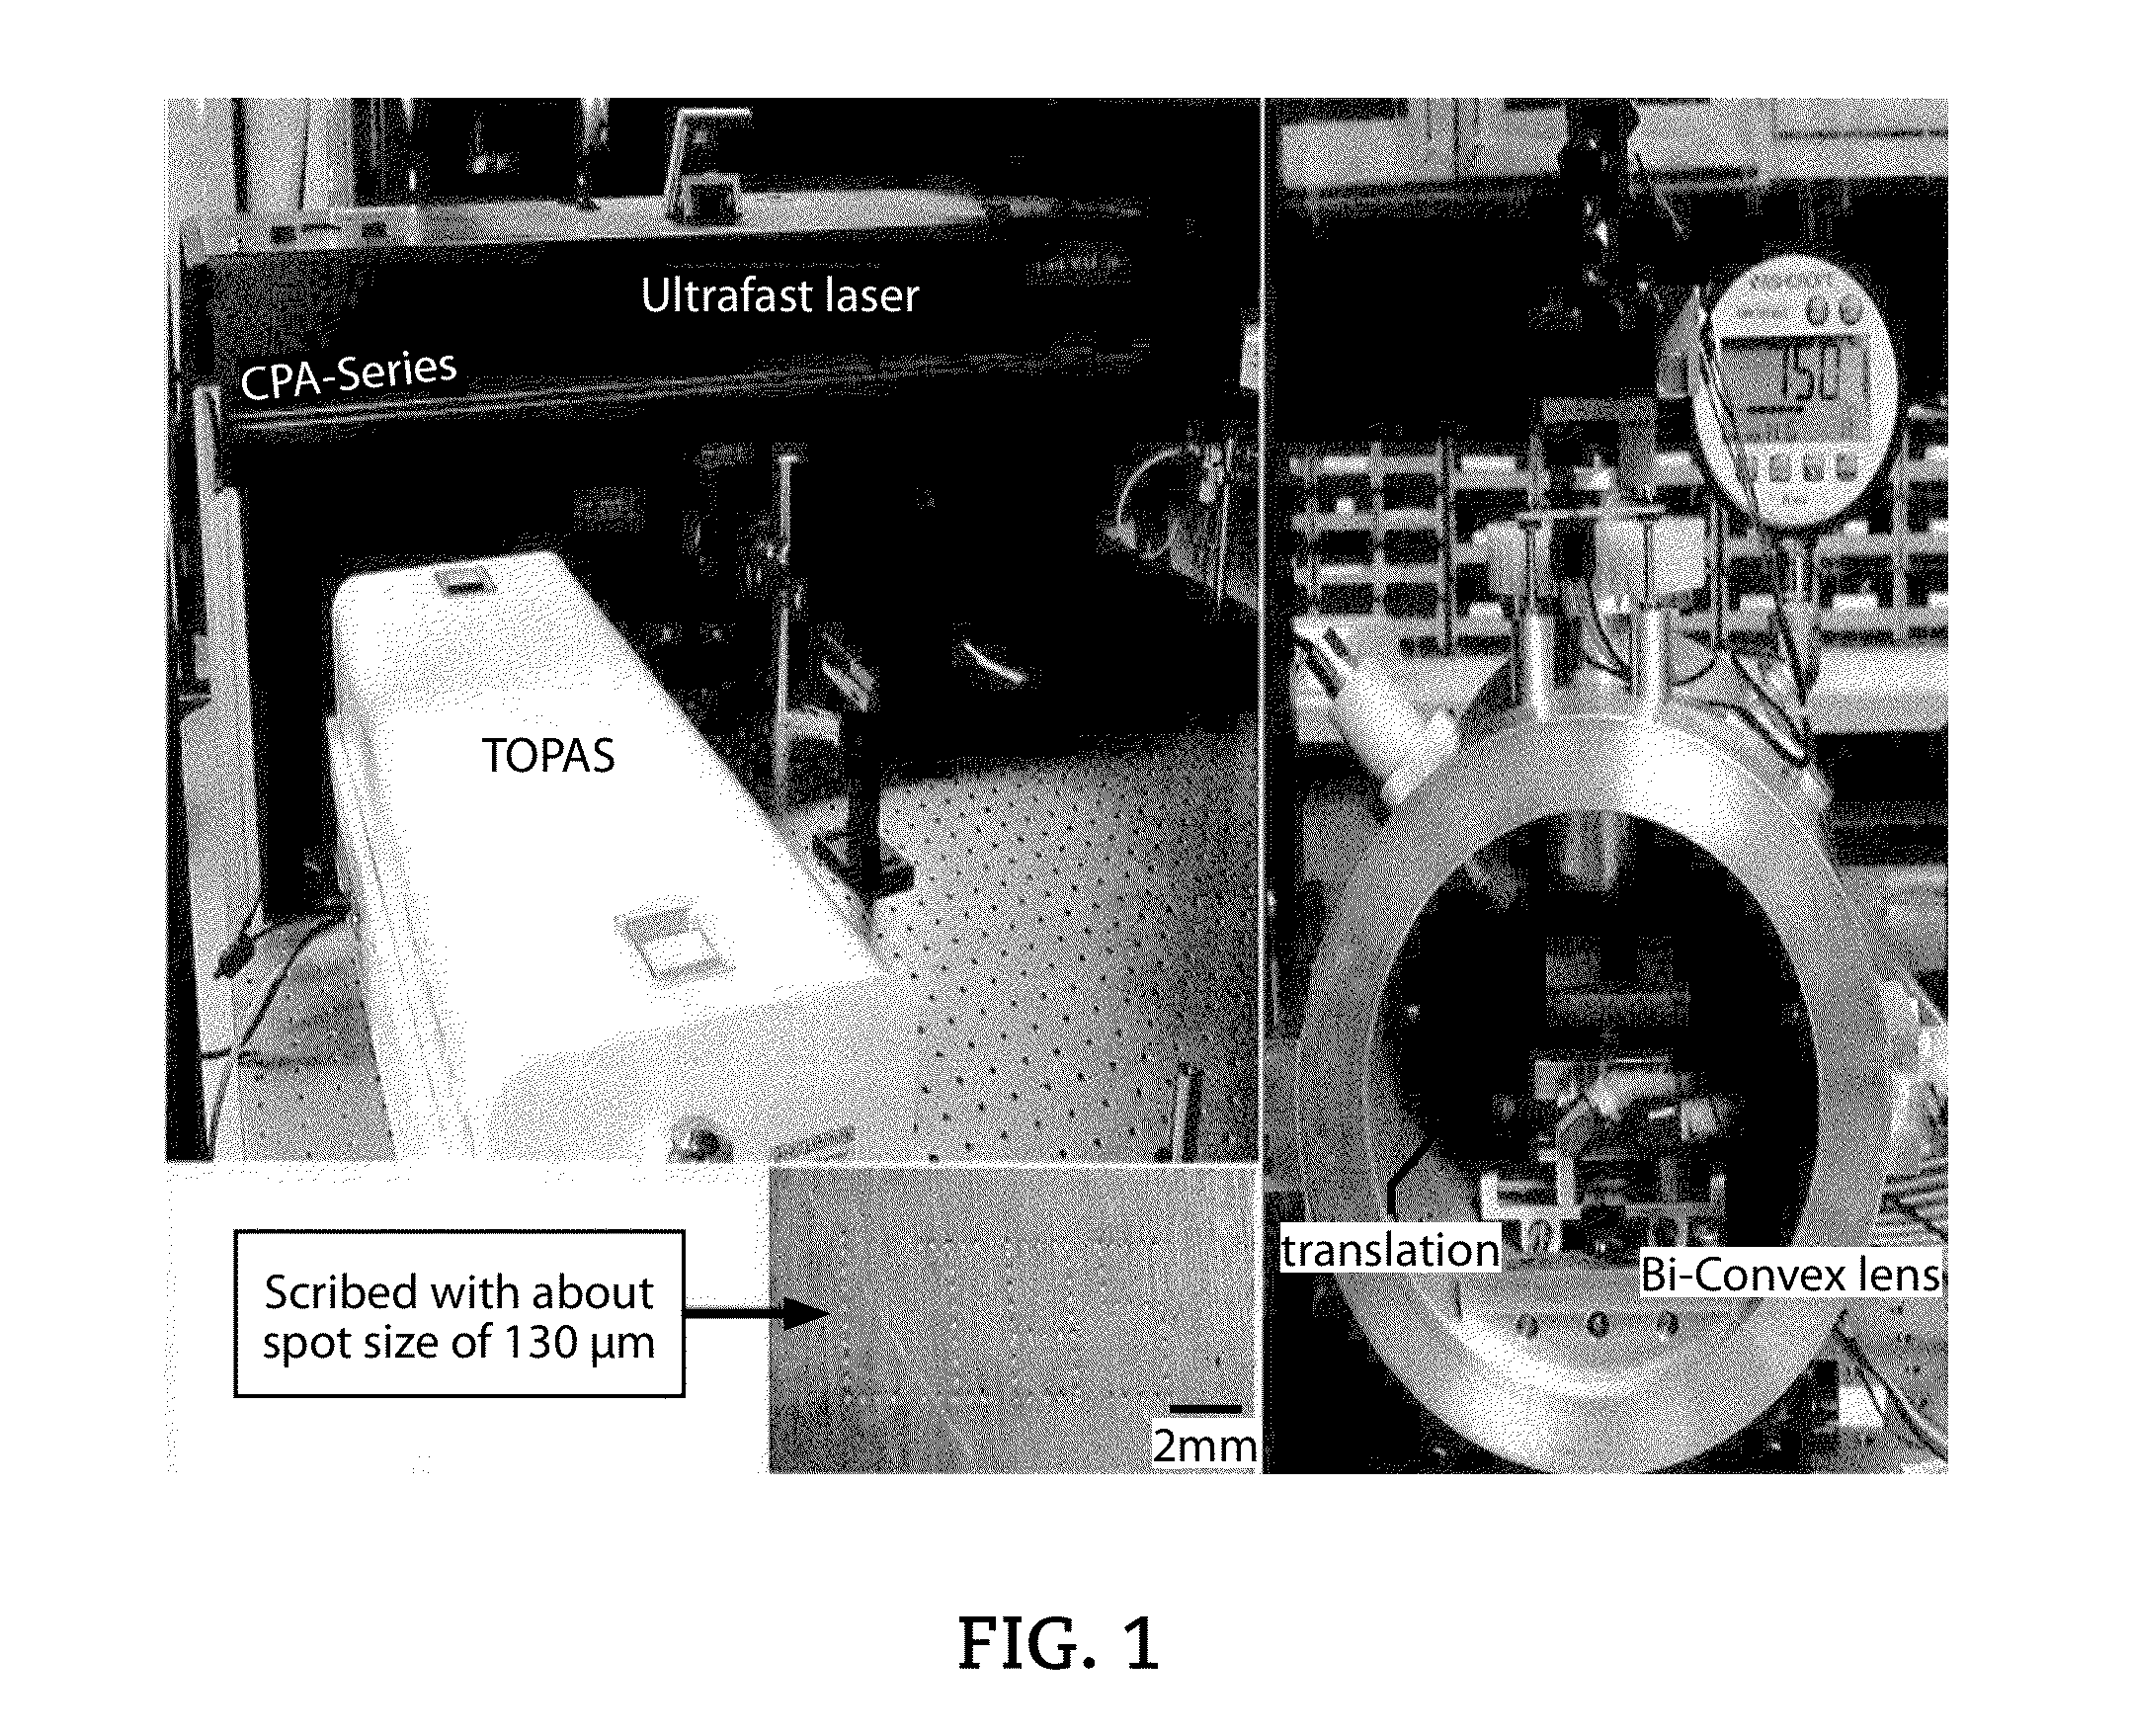 System and method for using stainless steel as a data archiving medium